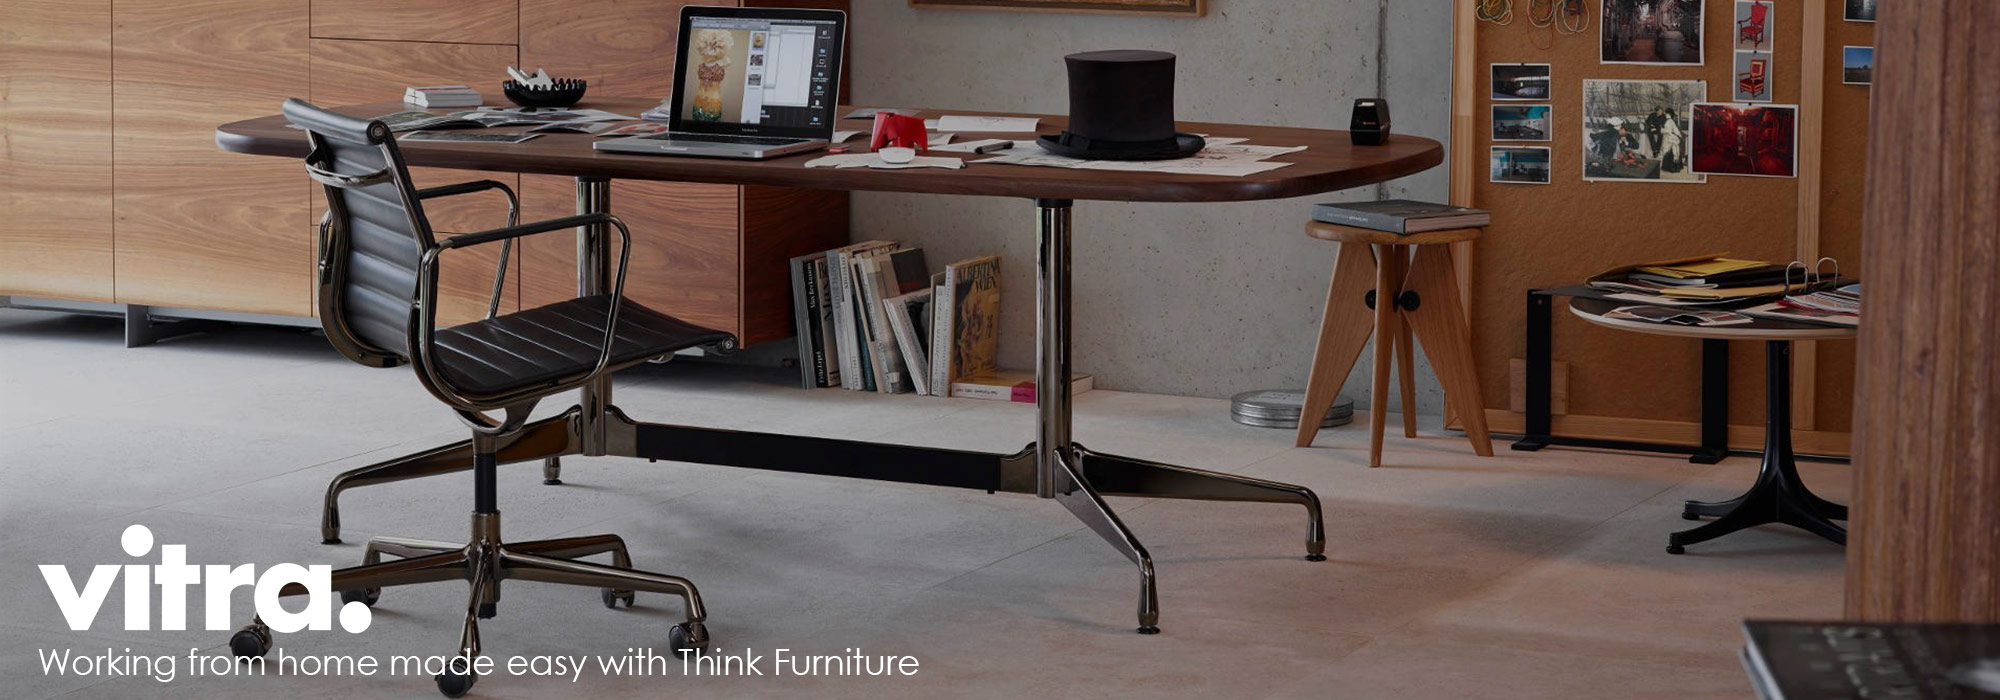 Work From Home With Think Furniture